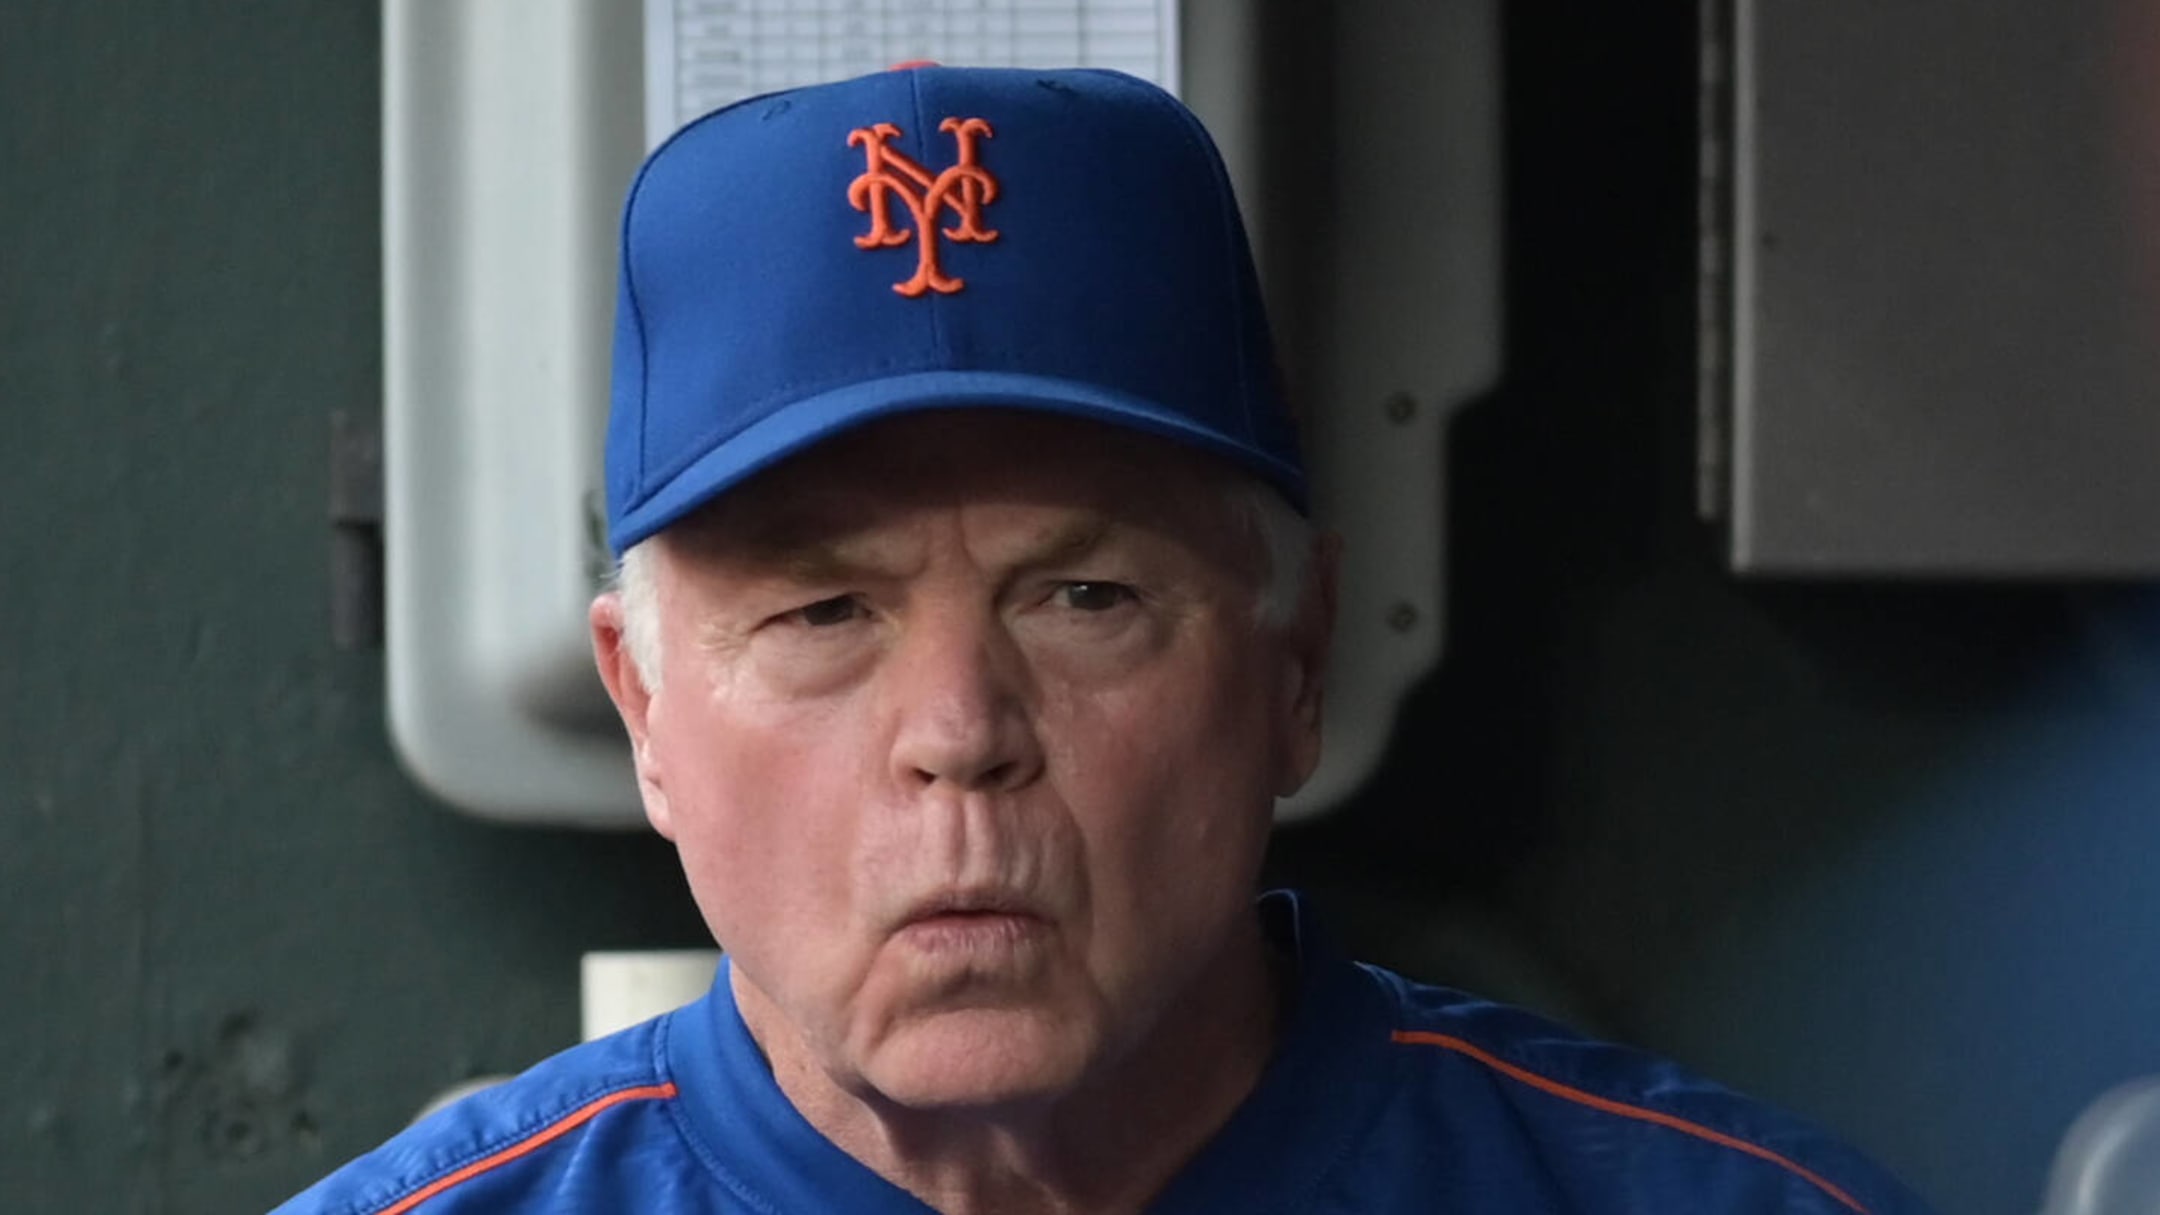 Mets manager's 'fate' will be determined this offseason, insider says 